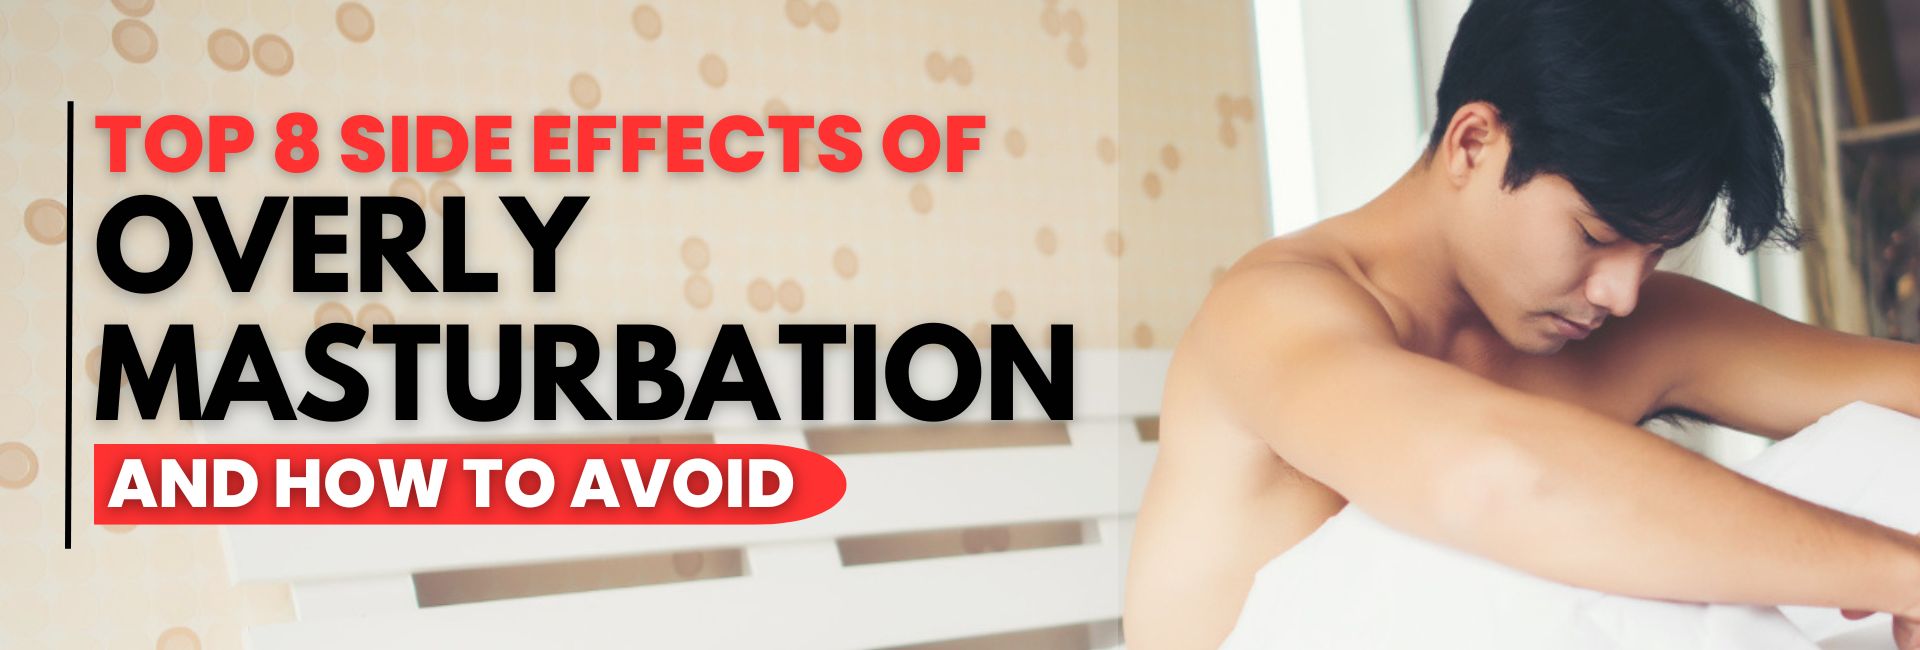 side effects of masturbating for male, daily masturbation side effect, side effects of masturbation in males daily on the brain, over masturbation side effects, over masturbation side effects on nerves, over masturbation side effects on eyes